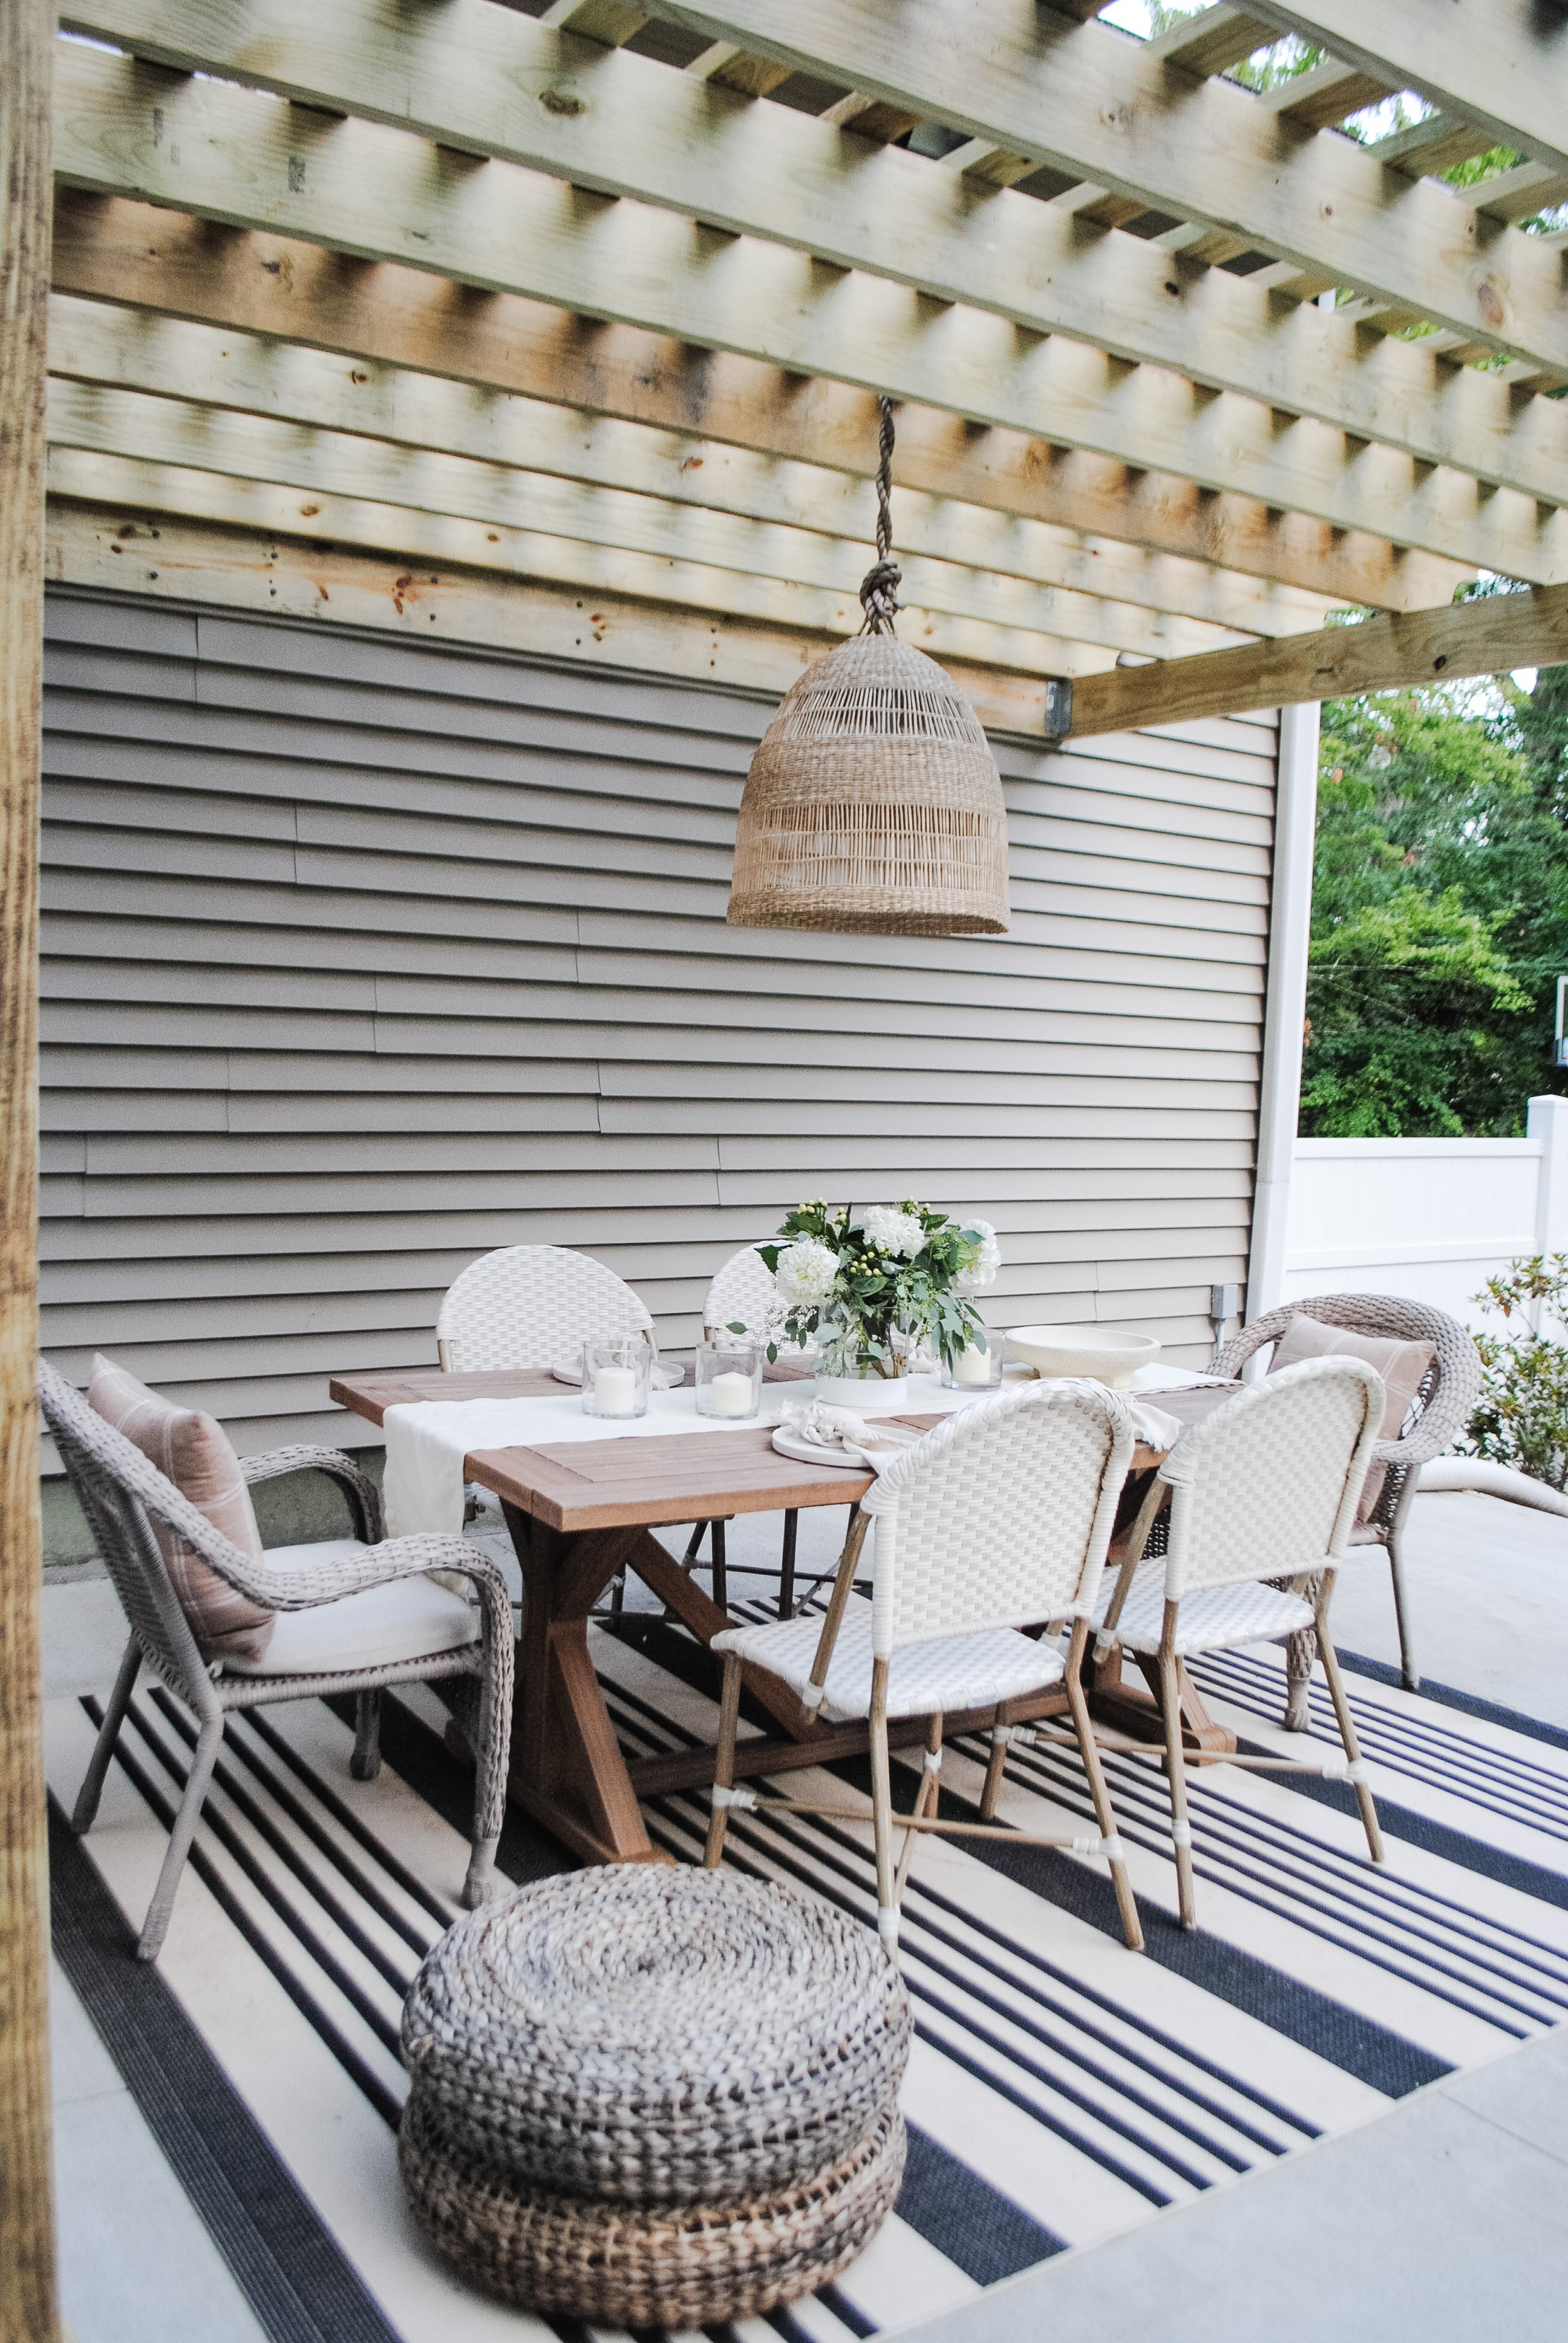 Announcing Our Transformed Outdoor Space with a NEW Pergola